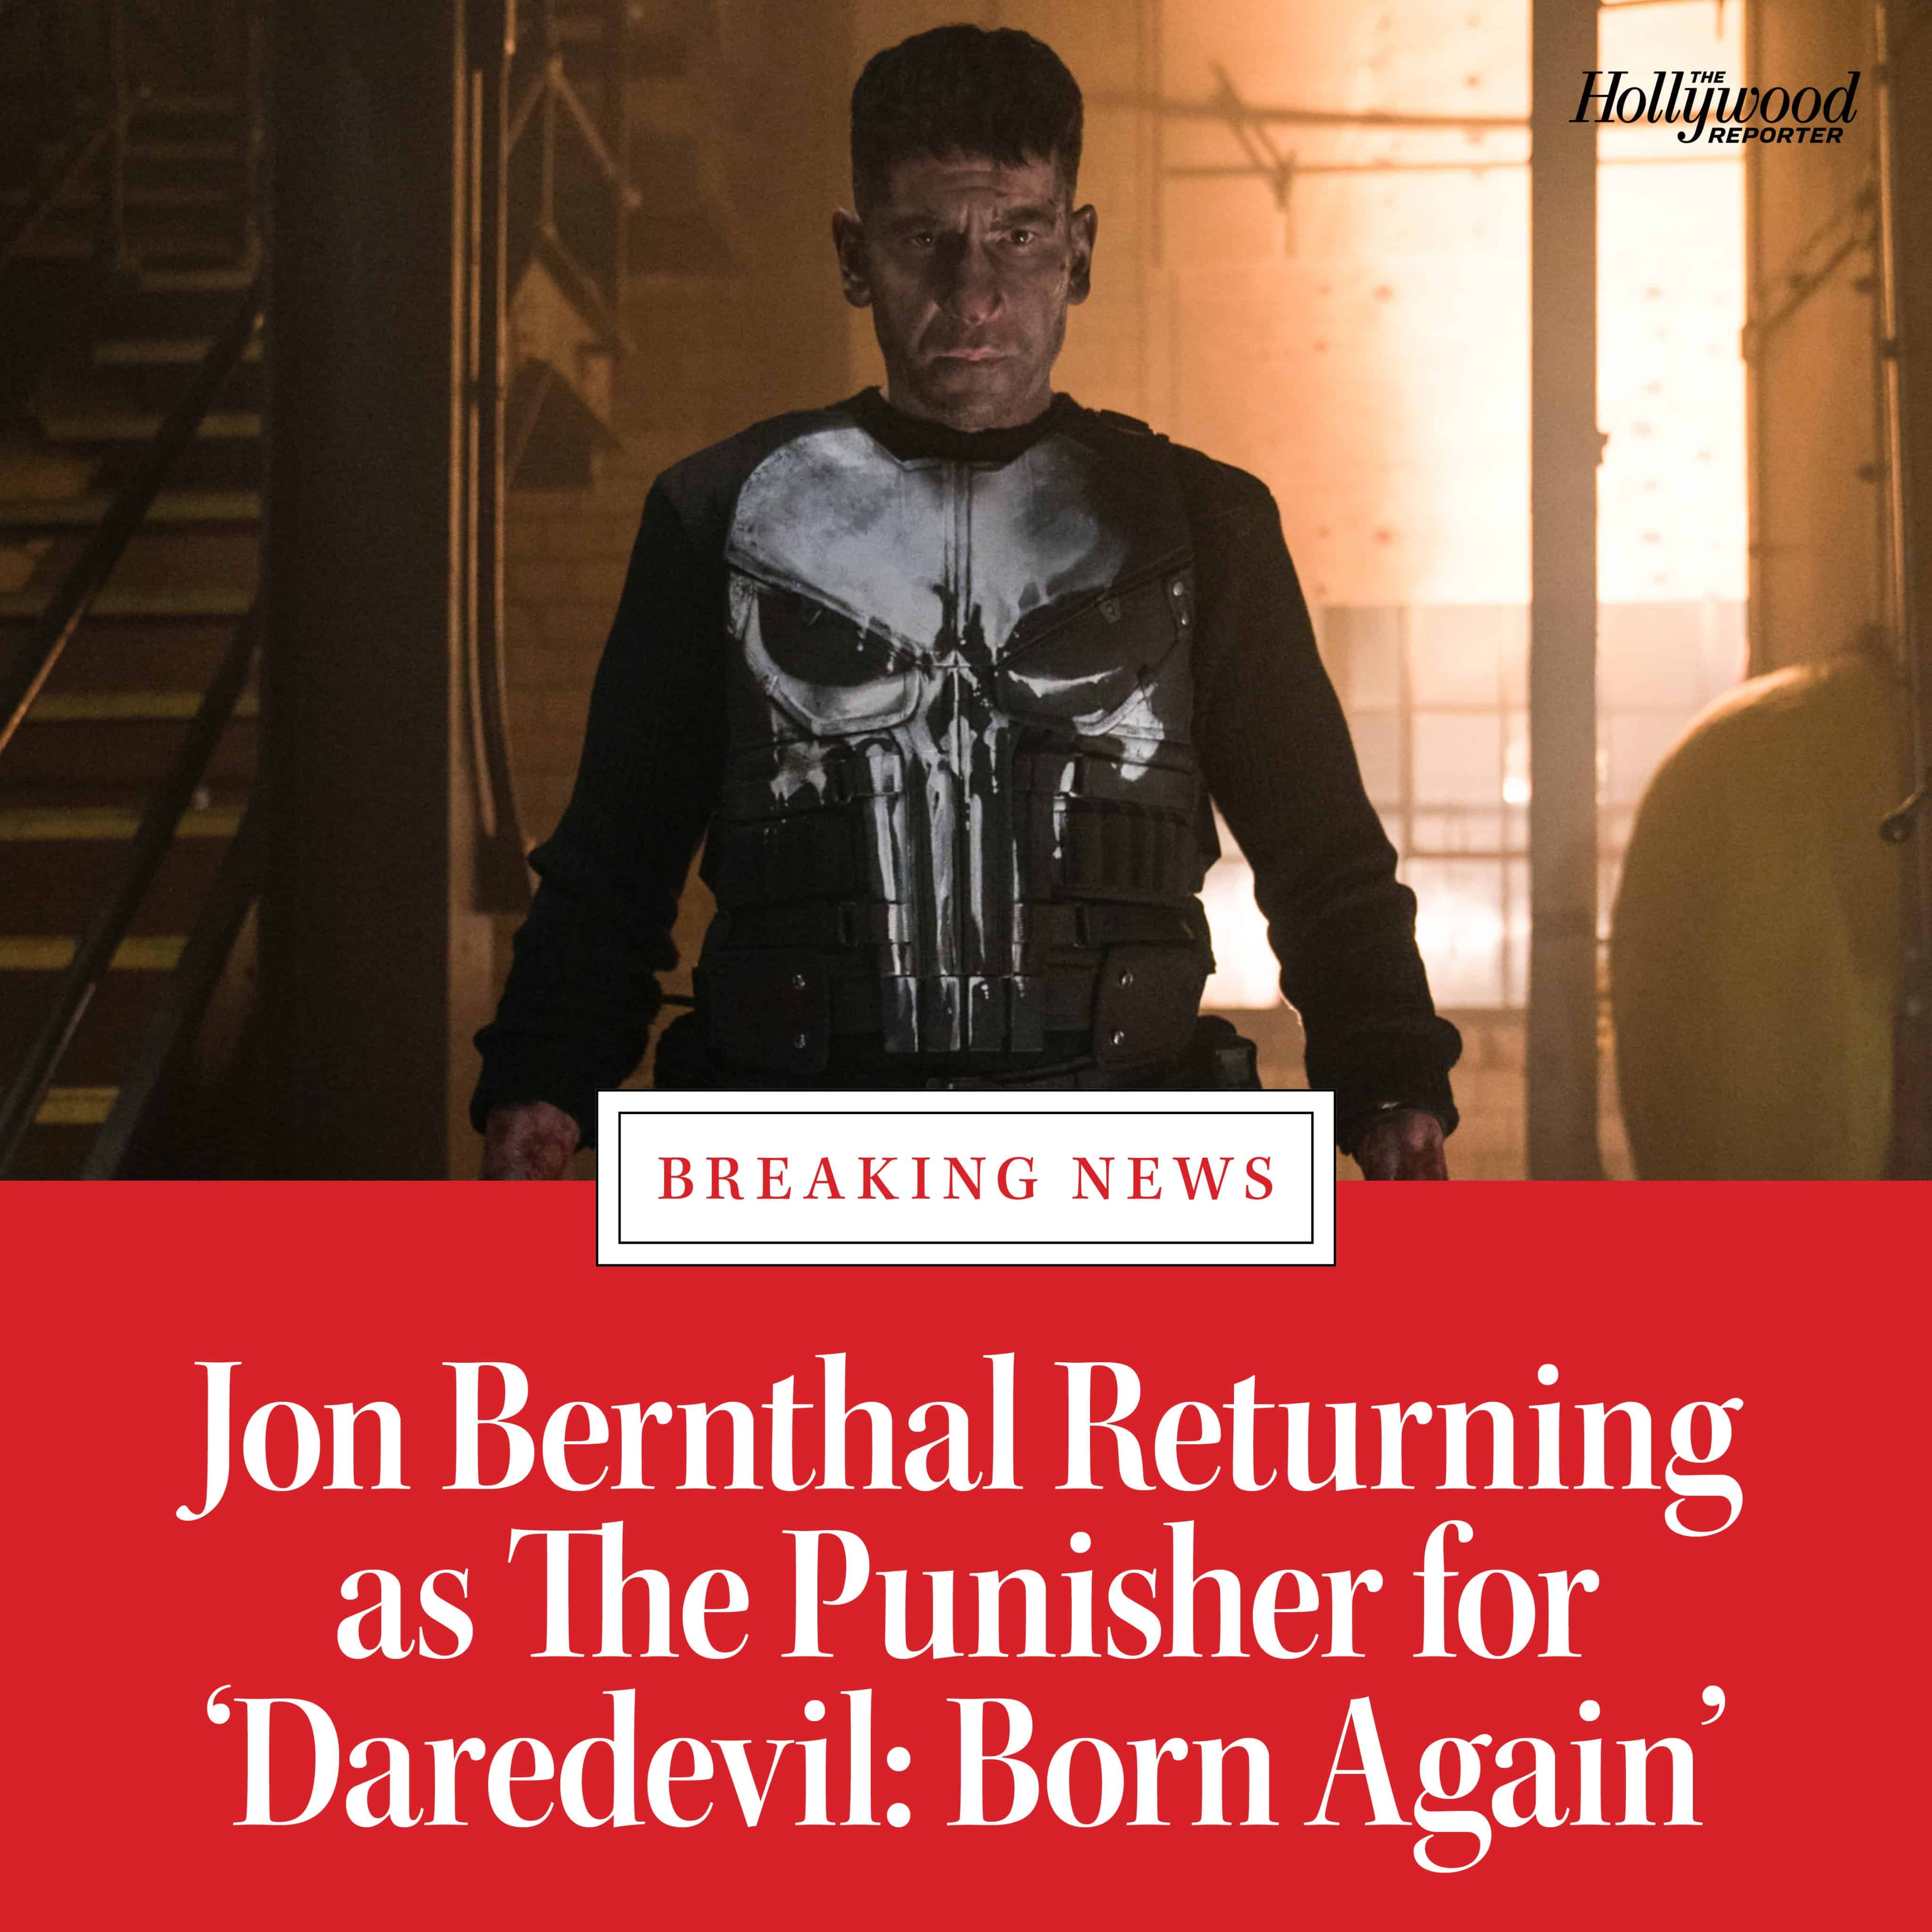 BREAKING!! Jon Bernthal will reprised his role as The Punisher in the upcoming Daredevil: Born Again!